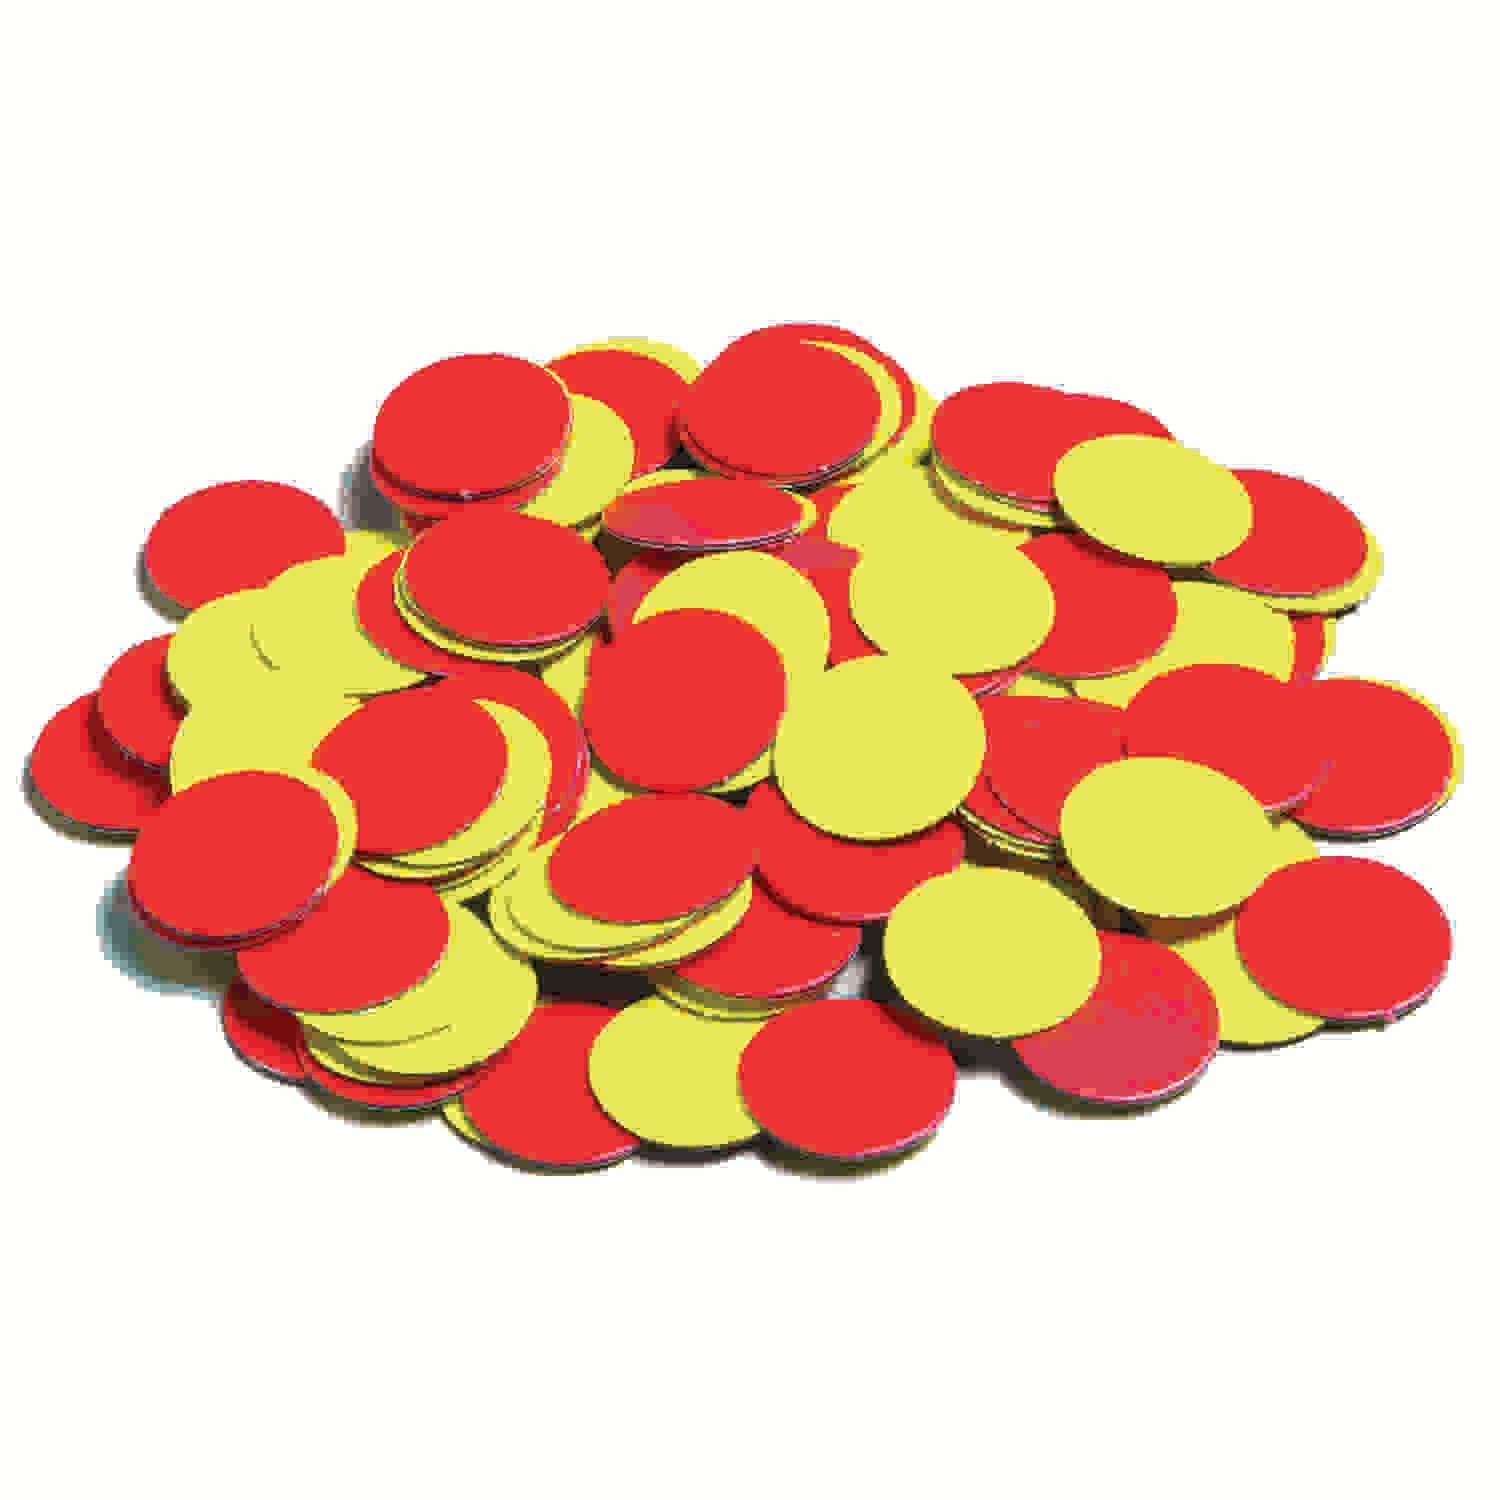 Two-Color Counters - Plastic - Magnetic - Set of 200